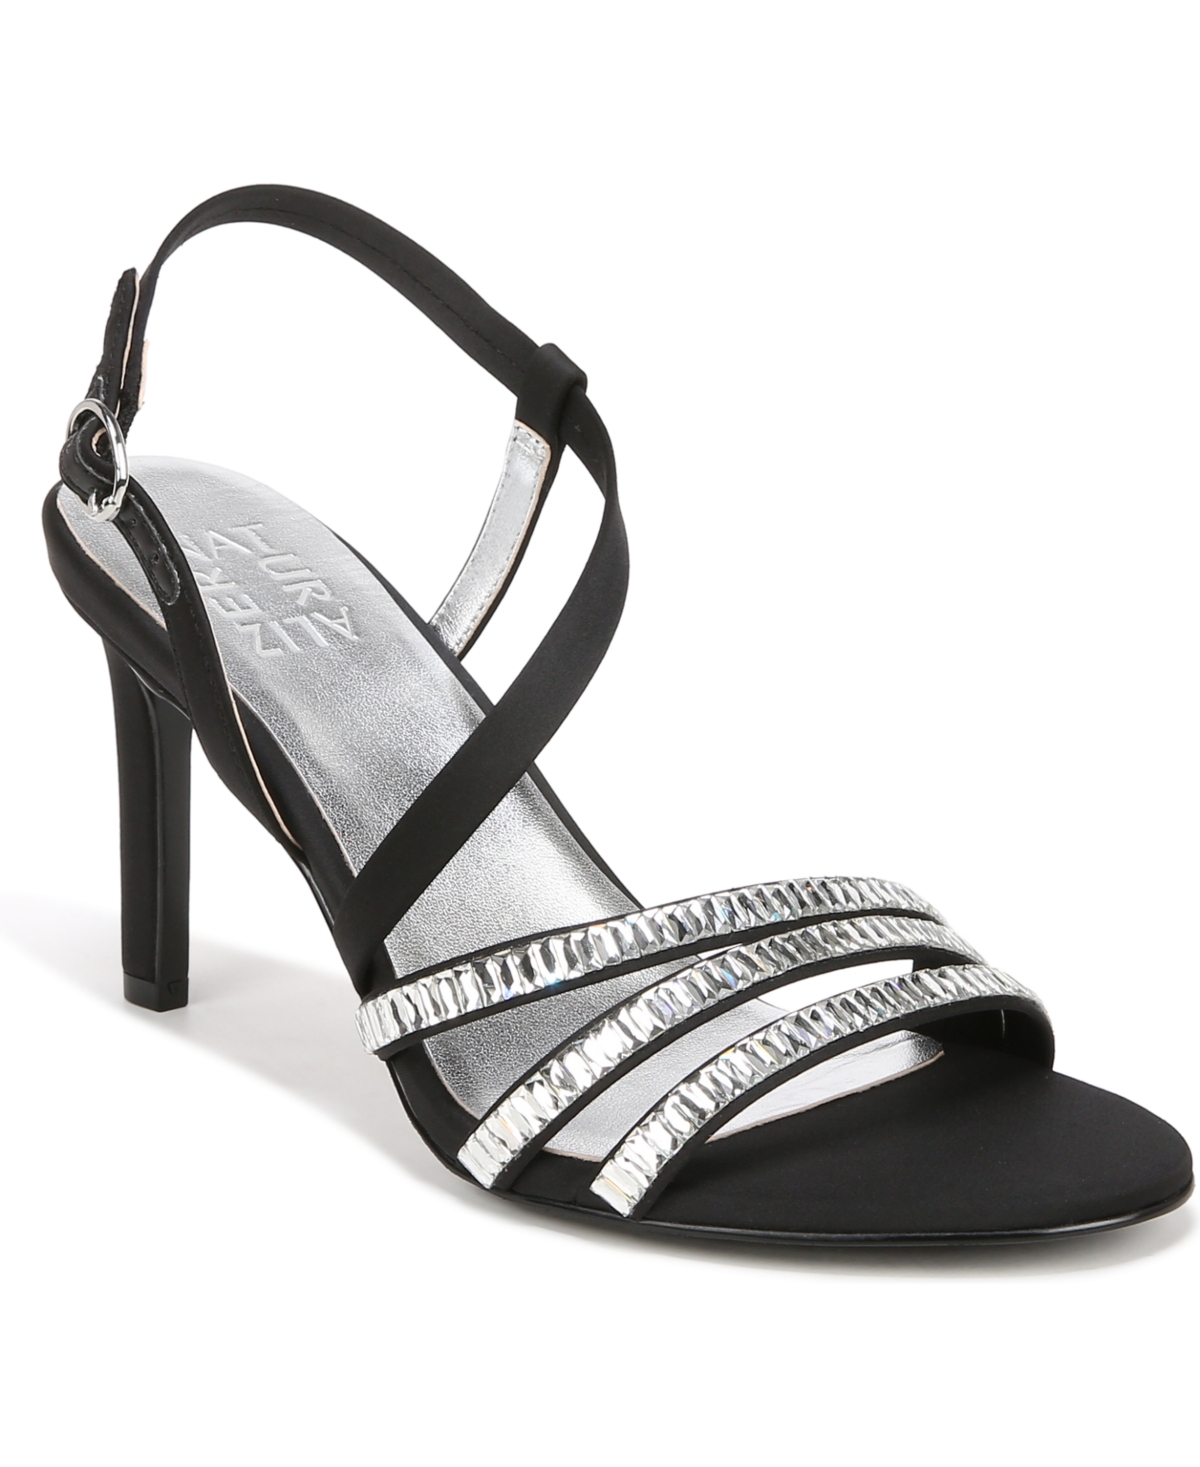 Naturalizer Kimberly 2 Strappy Dress Sandals In Black Satin,stones